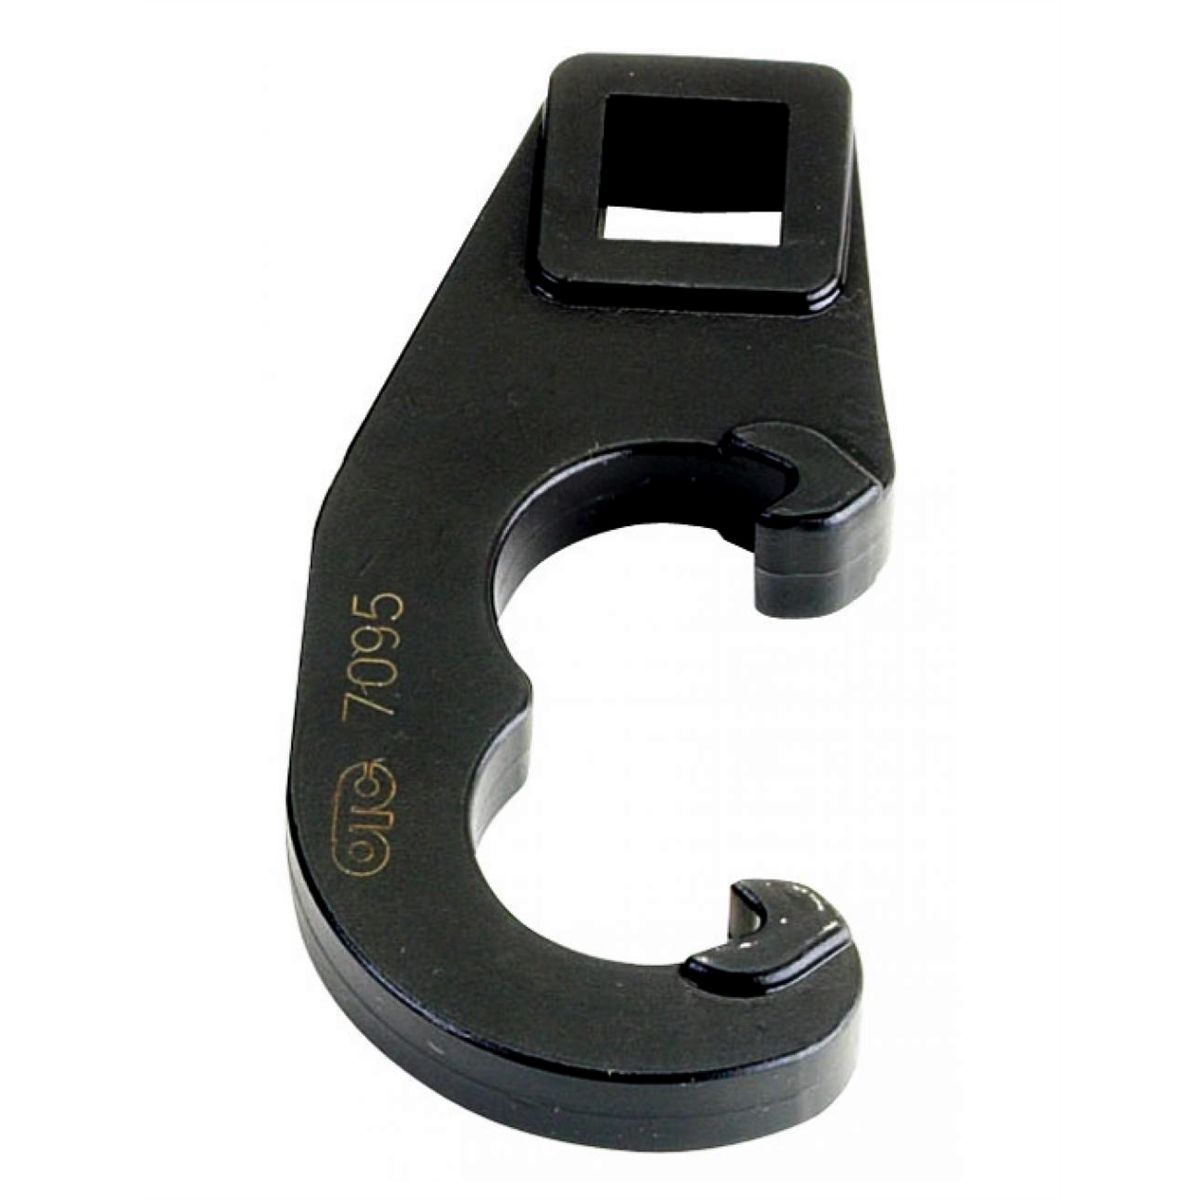 Tie Rod Adjusting Tool for Compact Cars - 3/4 In